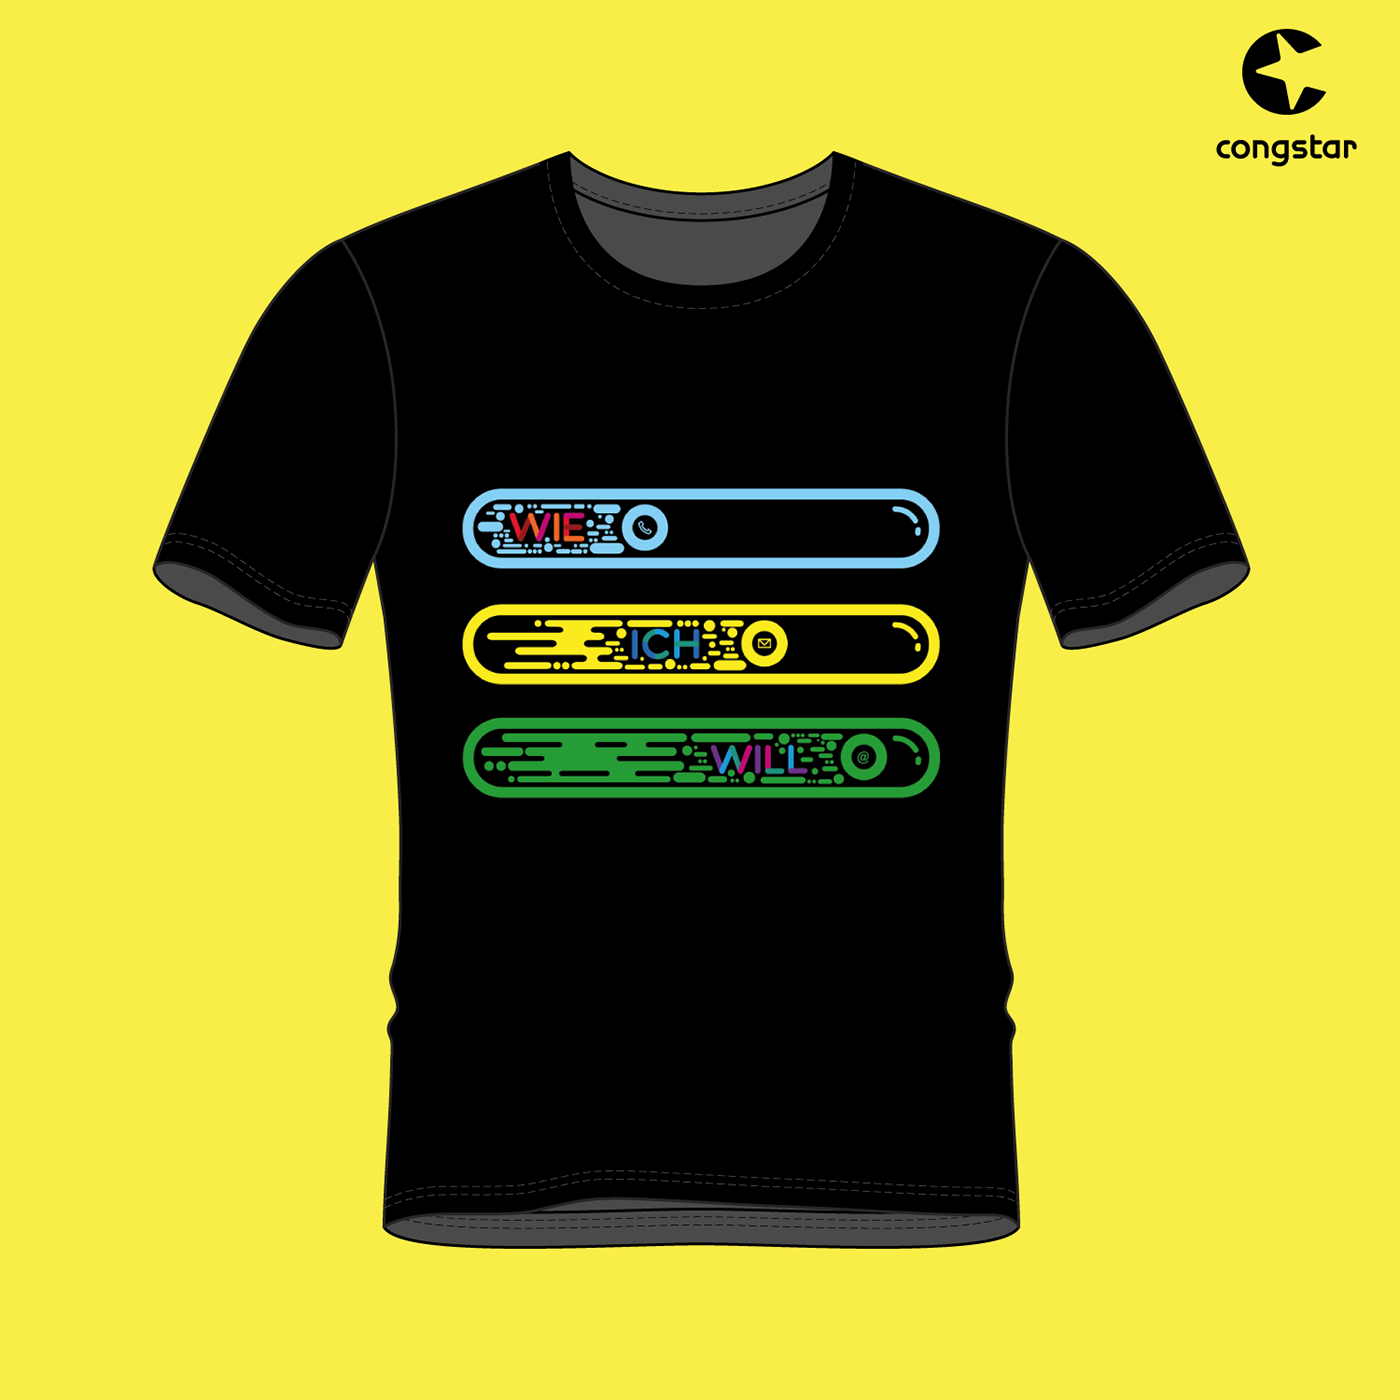 Congstar T-Shirt Design talenthouse ILLUSTRATION  colorful mobile phone provider germany smartphone mobile phone apparel